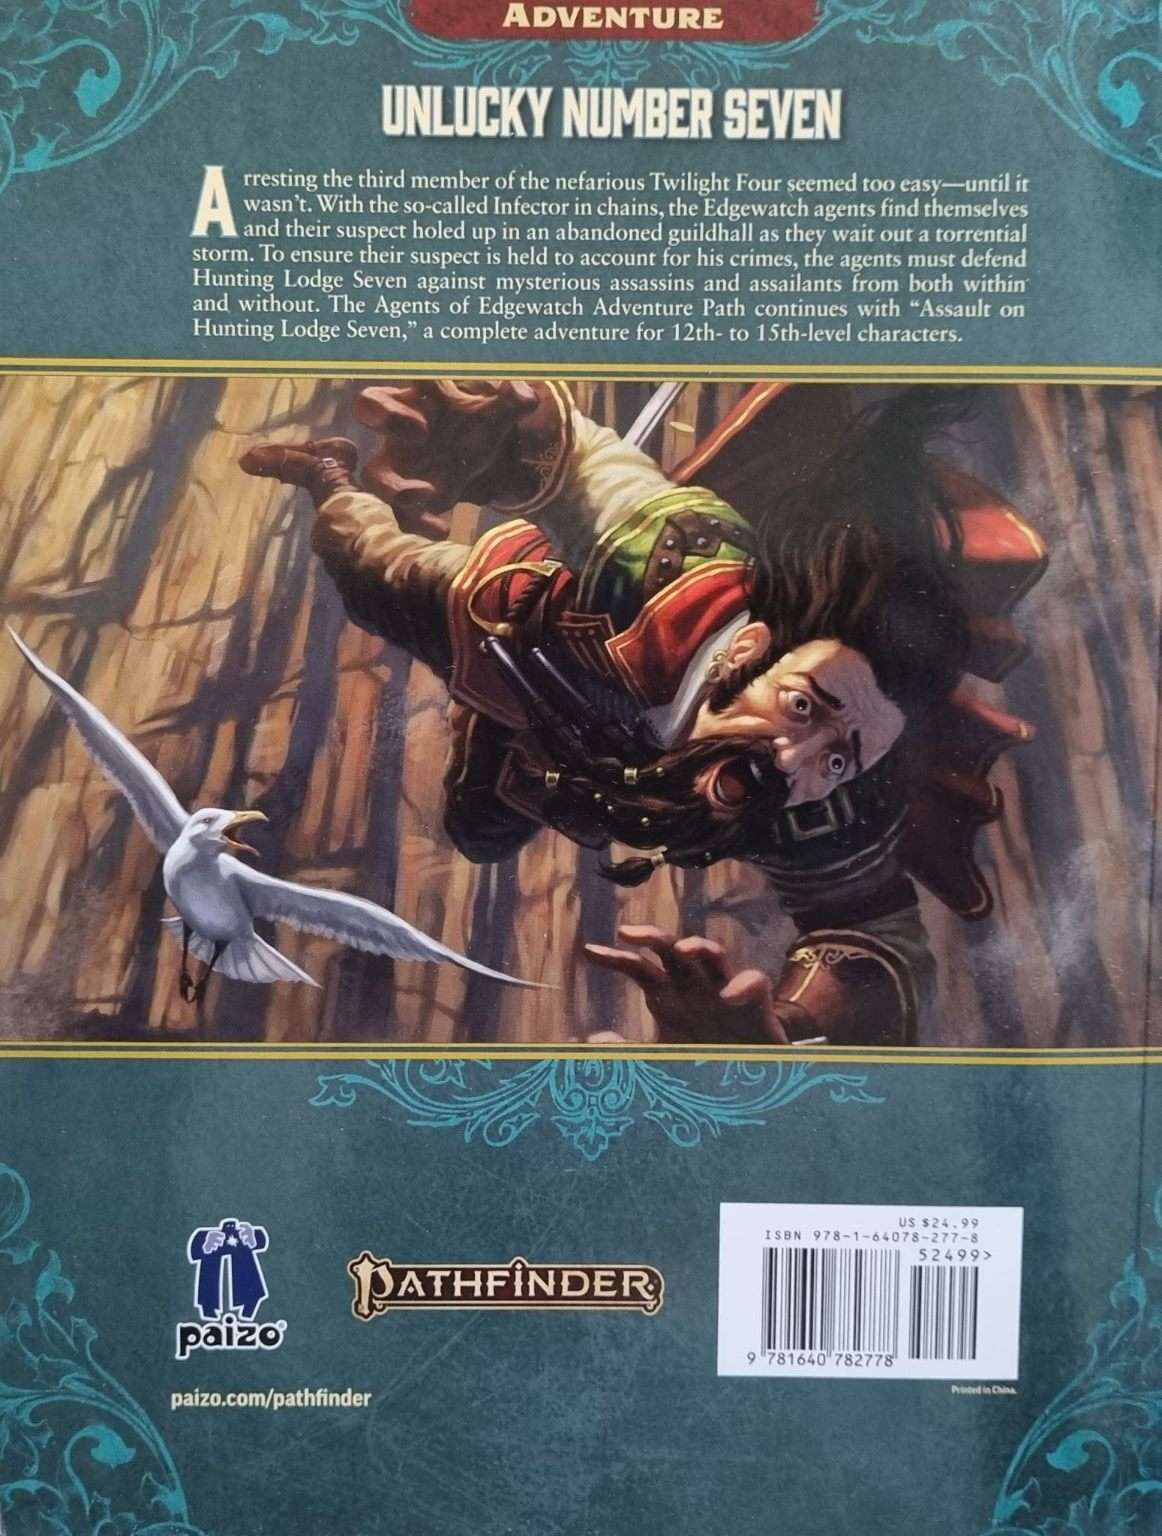 Pathfinder: Agents of Edgewatch - Assault on Hunting Lodge Seven (2e) Default Title